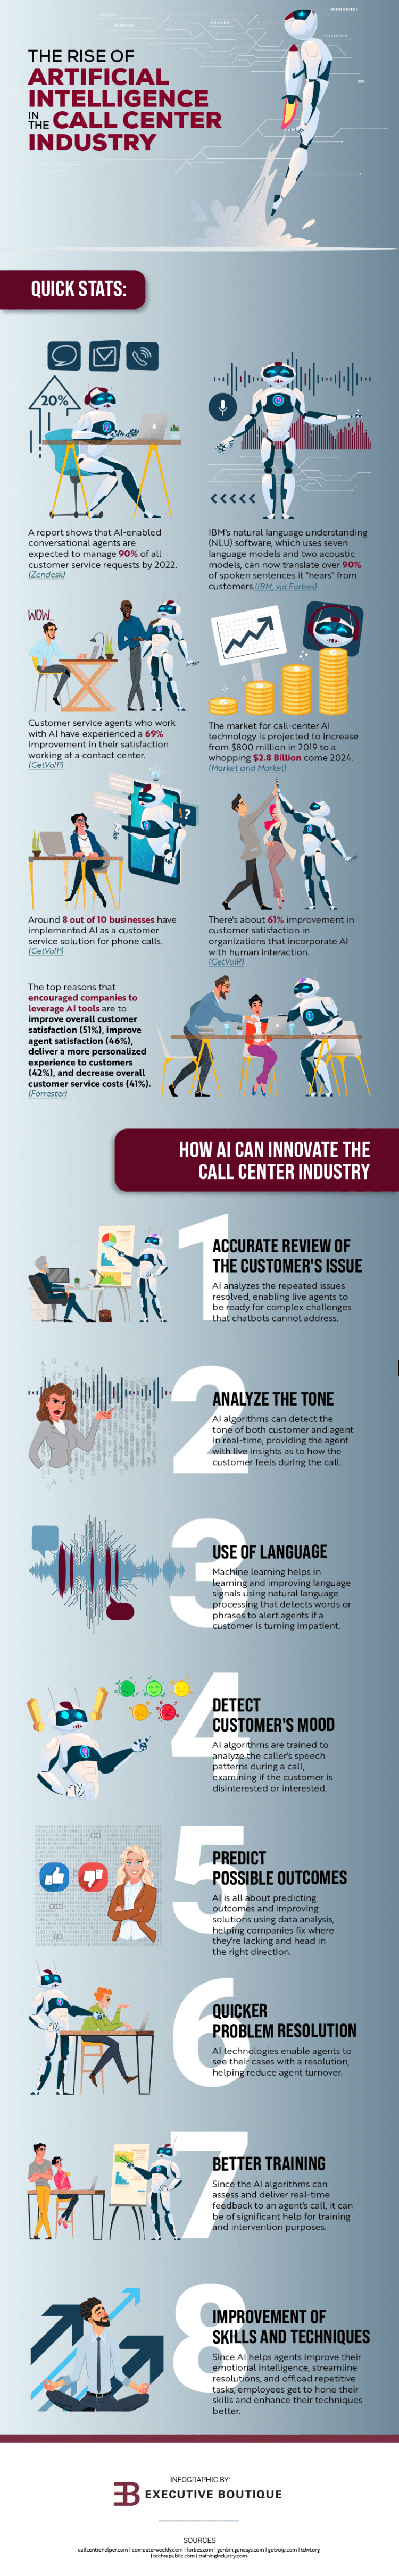 Rise of Artificial Intelligence in Call Centers